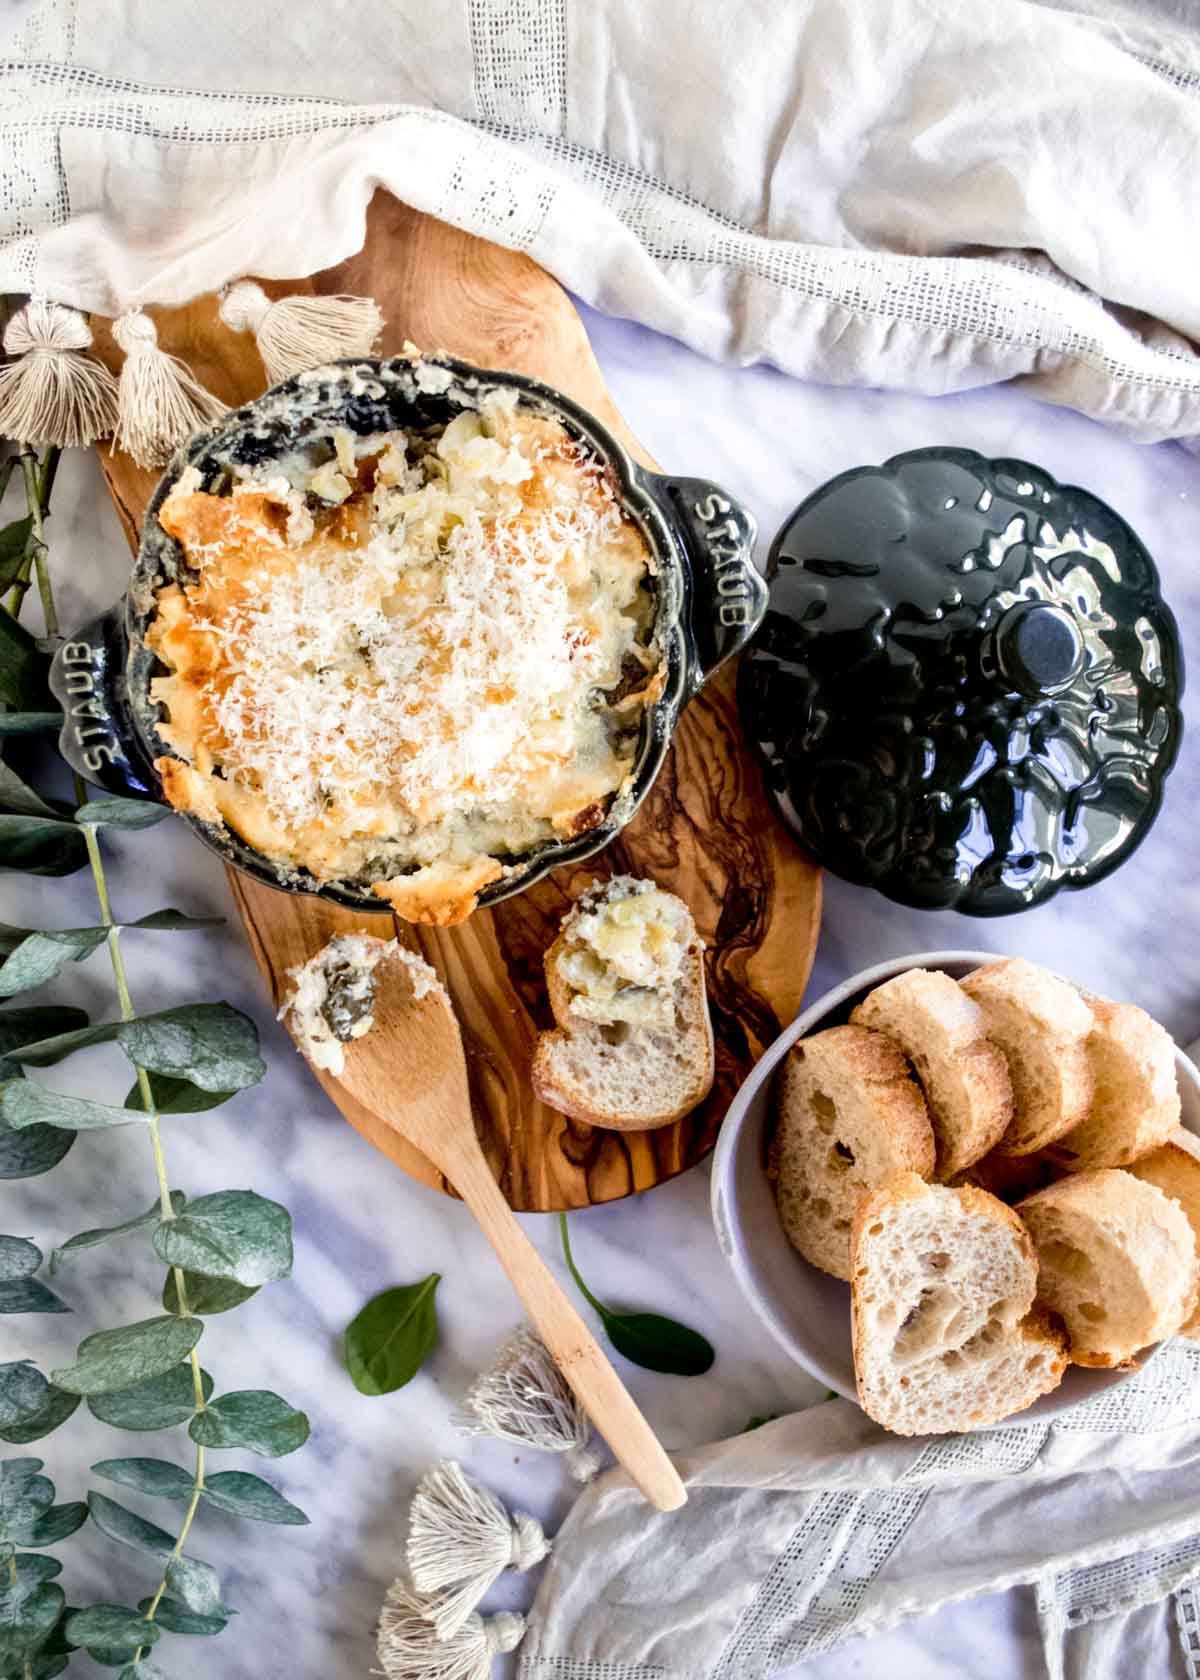 Creamy Spinach and Artichoke Dip in serving bowl with spoon and bread flatlay.